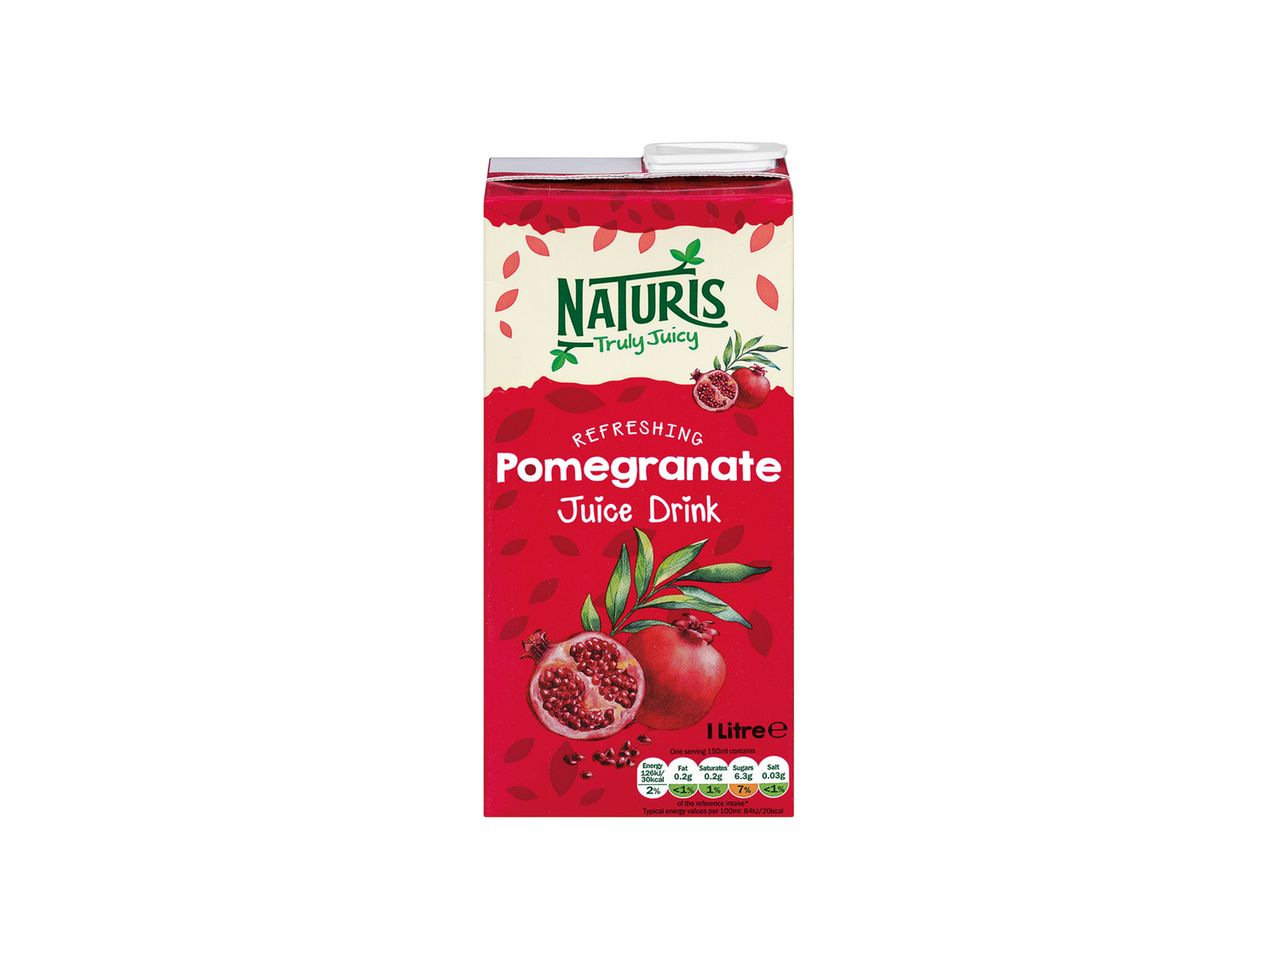 Go to full screen view: Naturis Pomegranate Juice Drink - Image 1